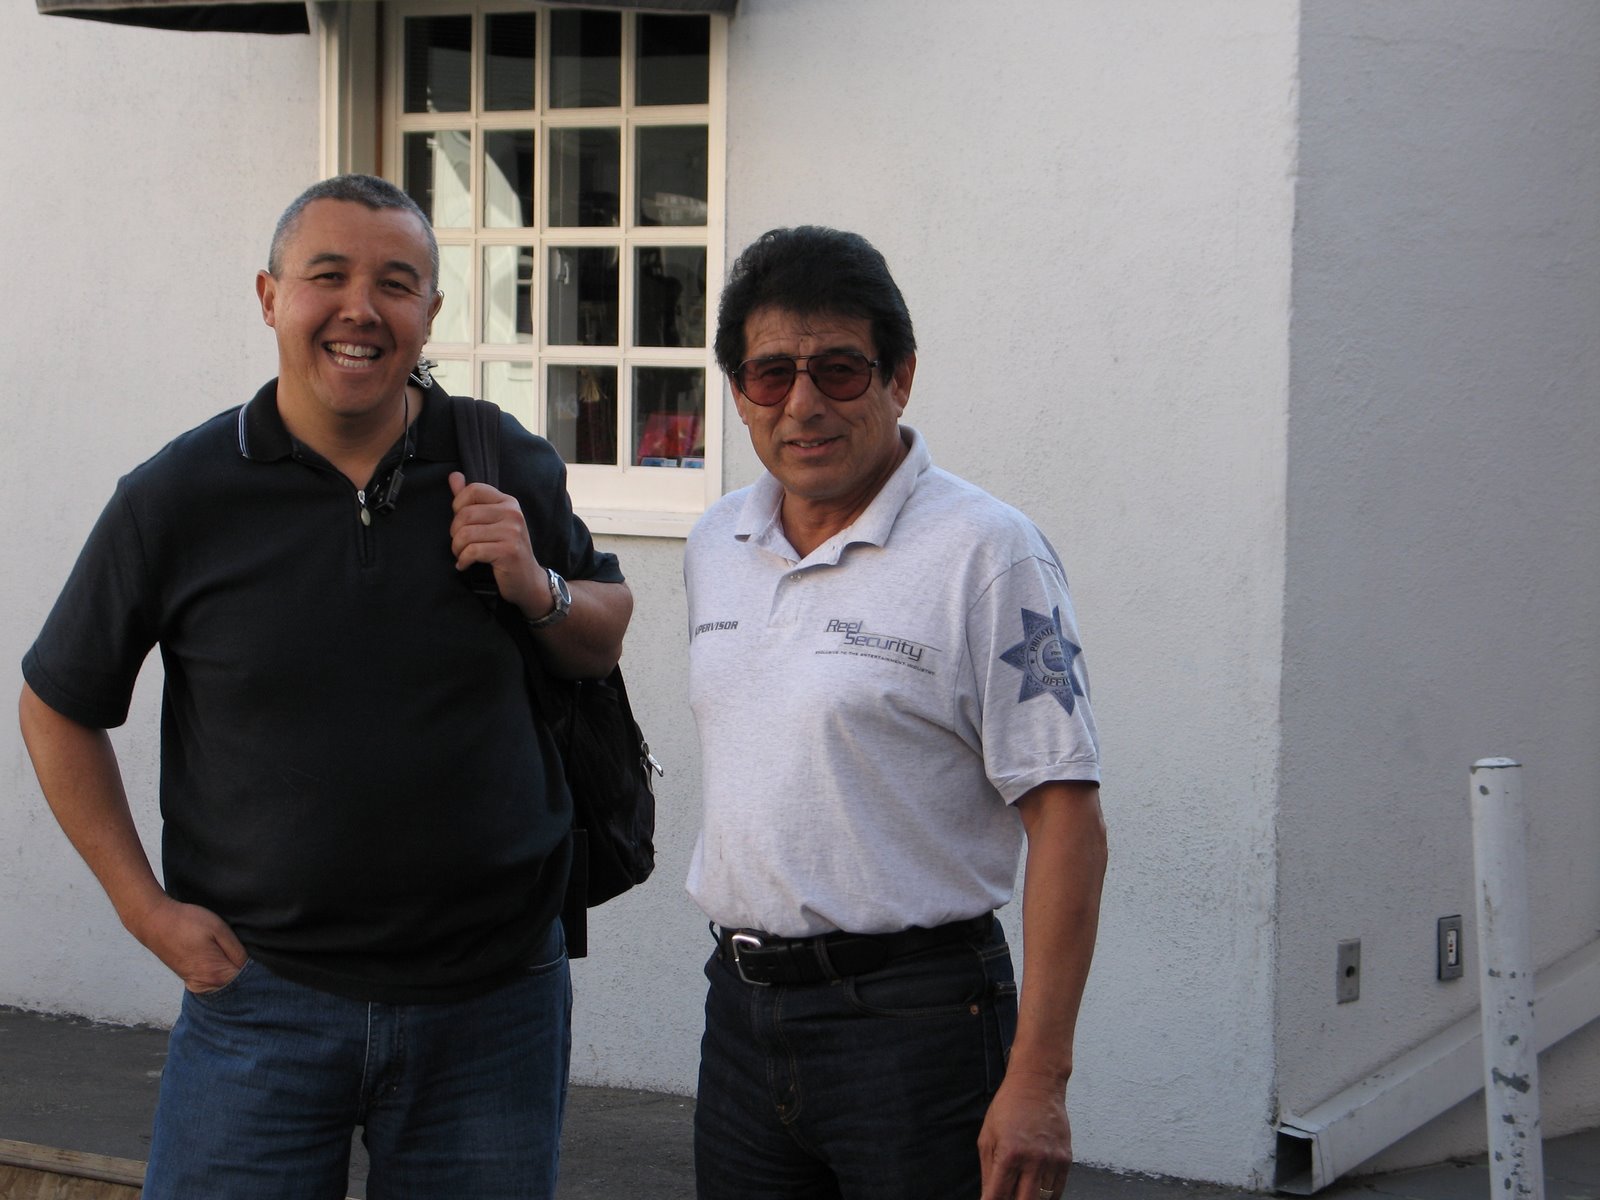 Kim Thio with Supervisor Jerry from Reel Security